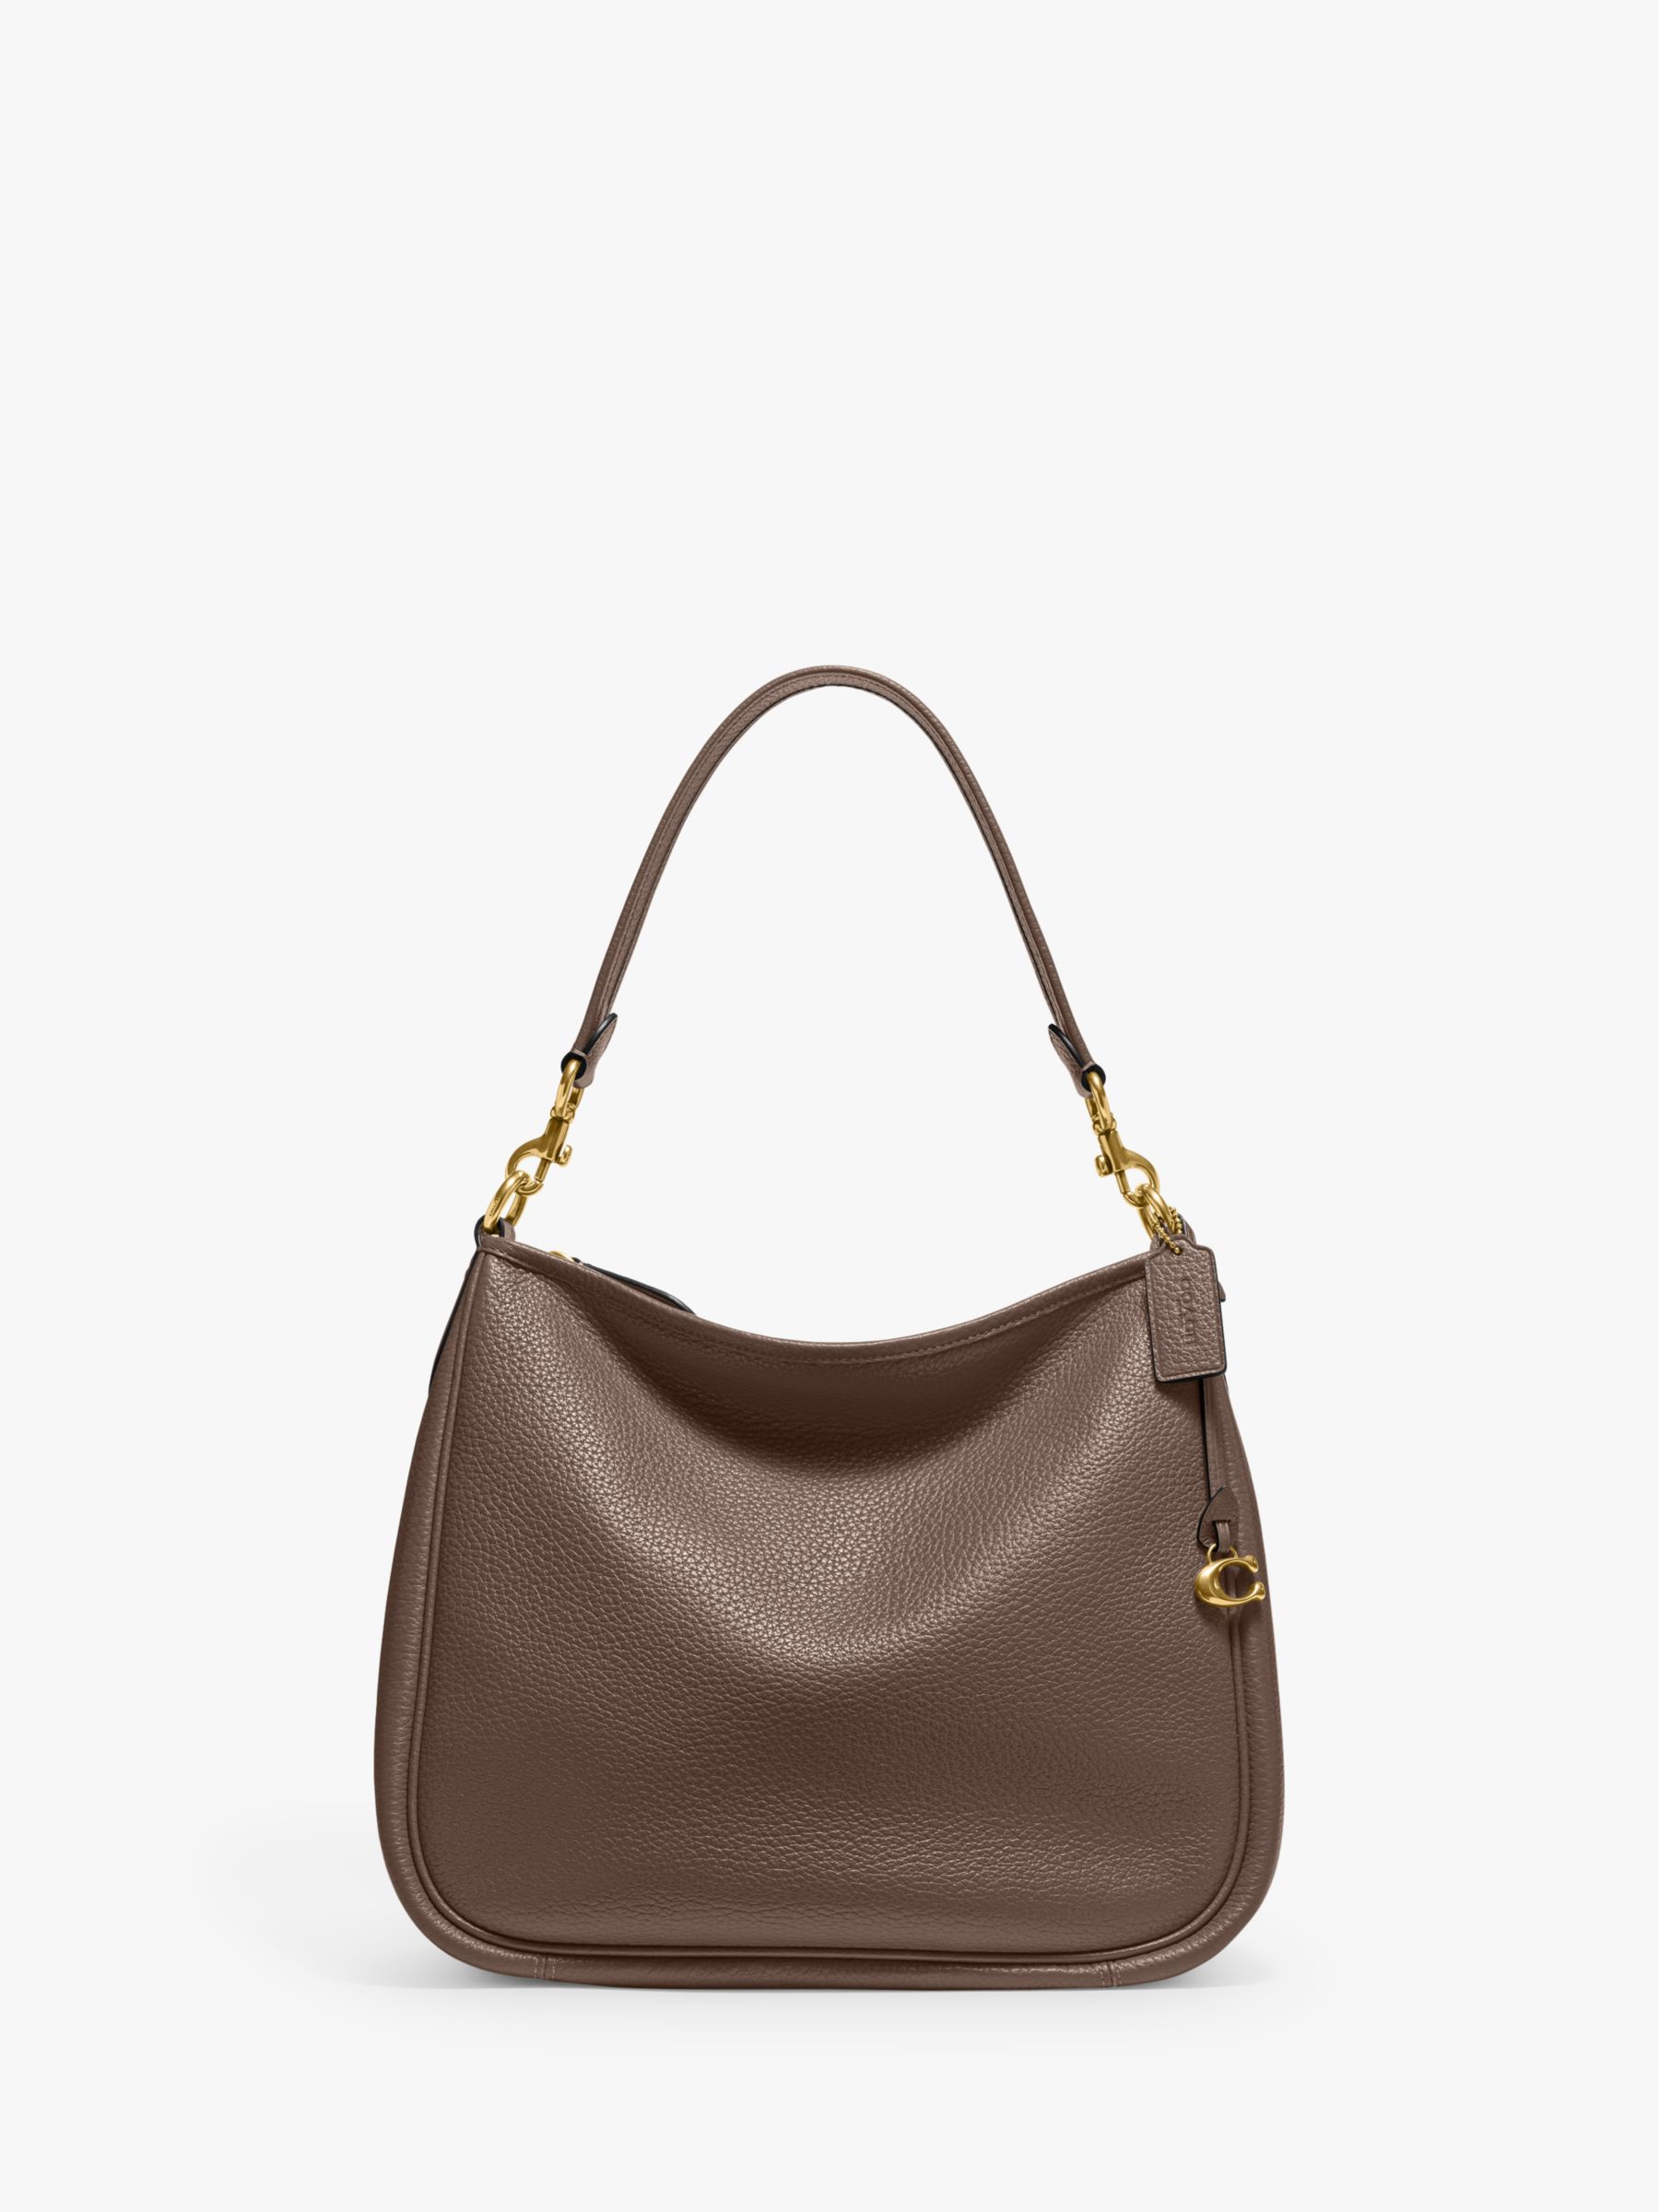 Coach Leather Bags & Handbags for Women for sale